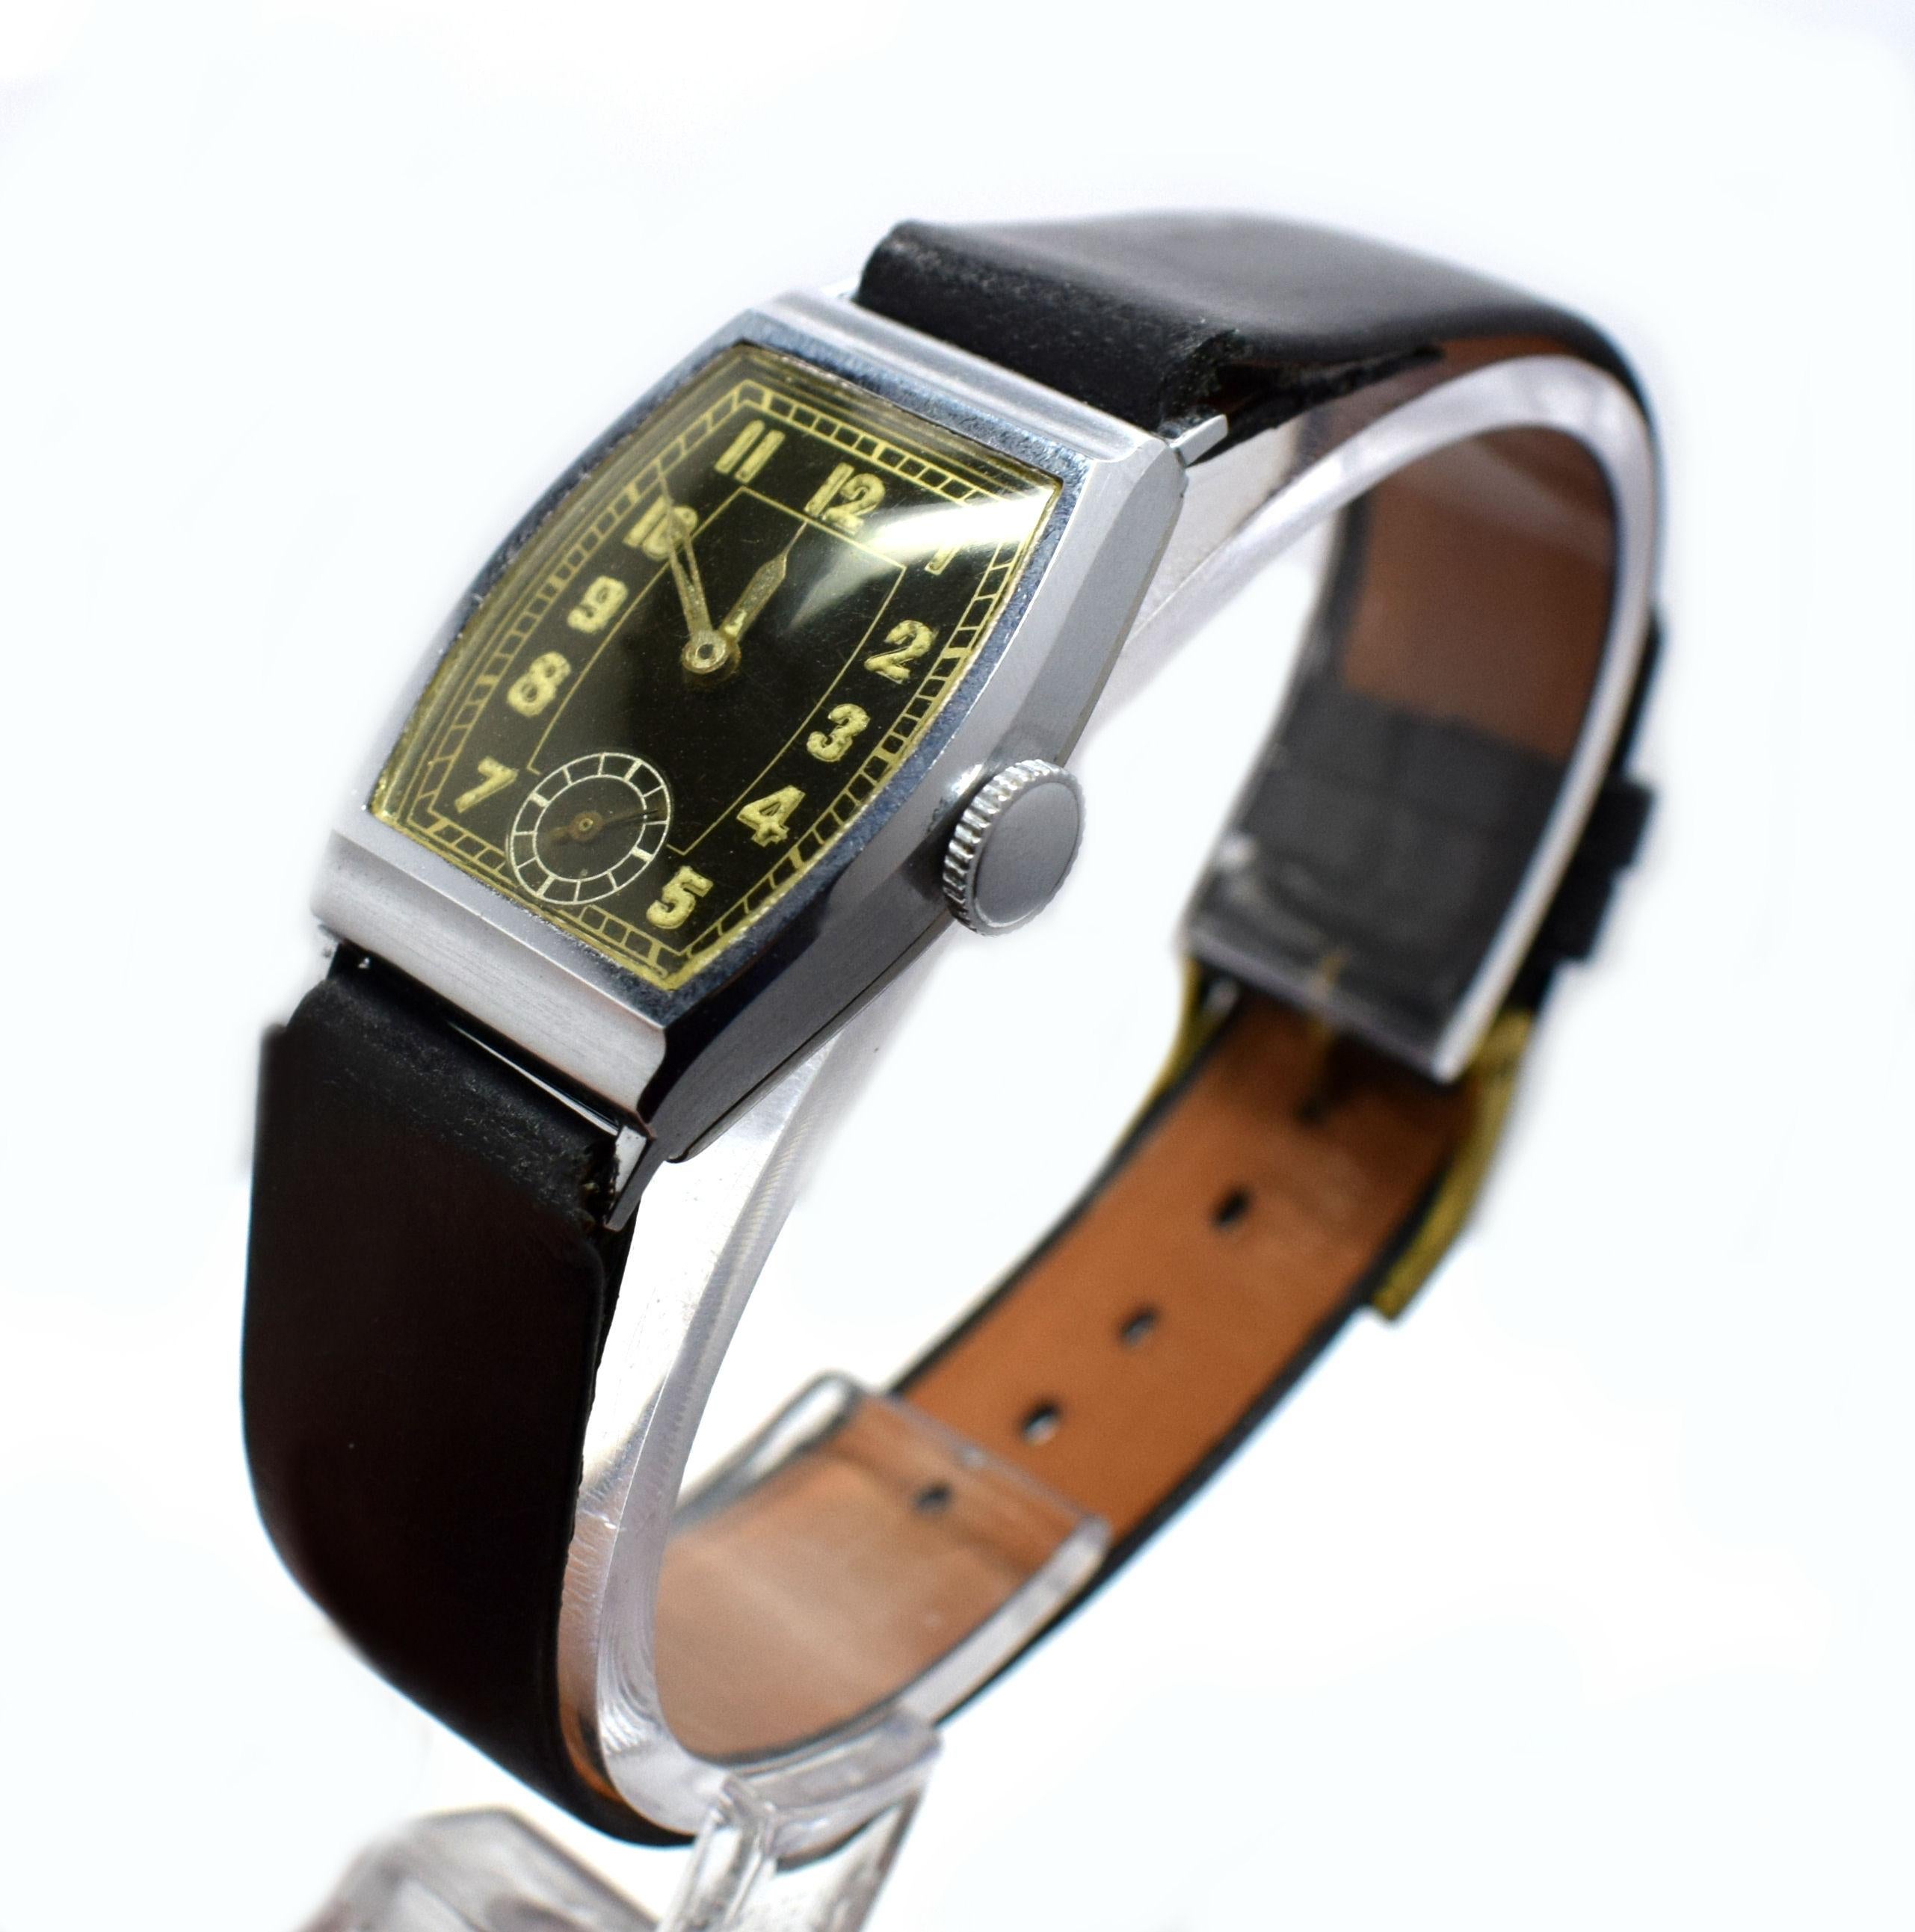 This is a golden opportunity to acquire a perfect condition Art Deco Gents wrist watch. This is what we call 'old new stock', that is to say it's of the period dating to the 1930's but has never been sold, marketed or worn, as you can imagine that